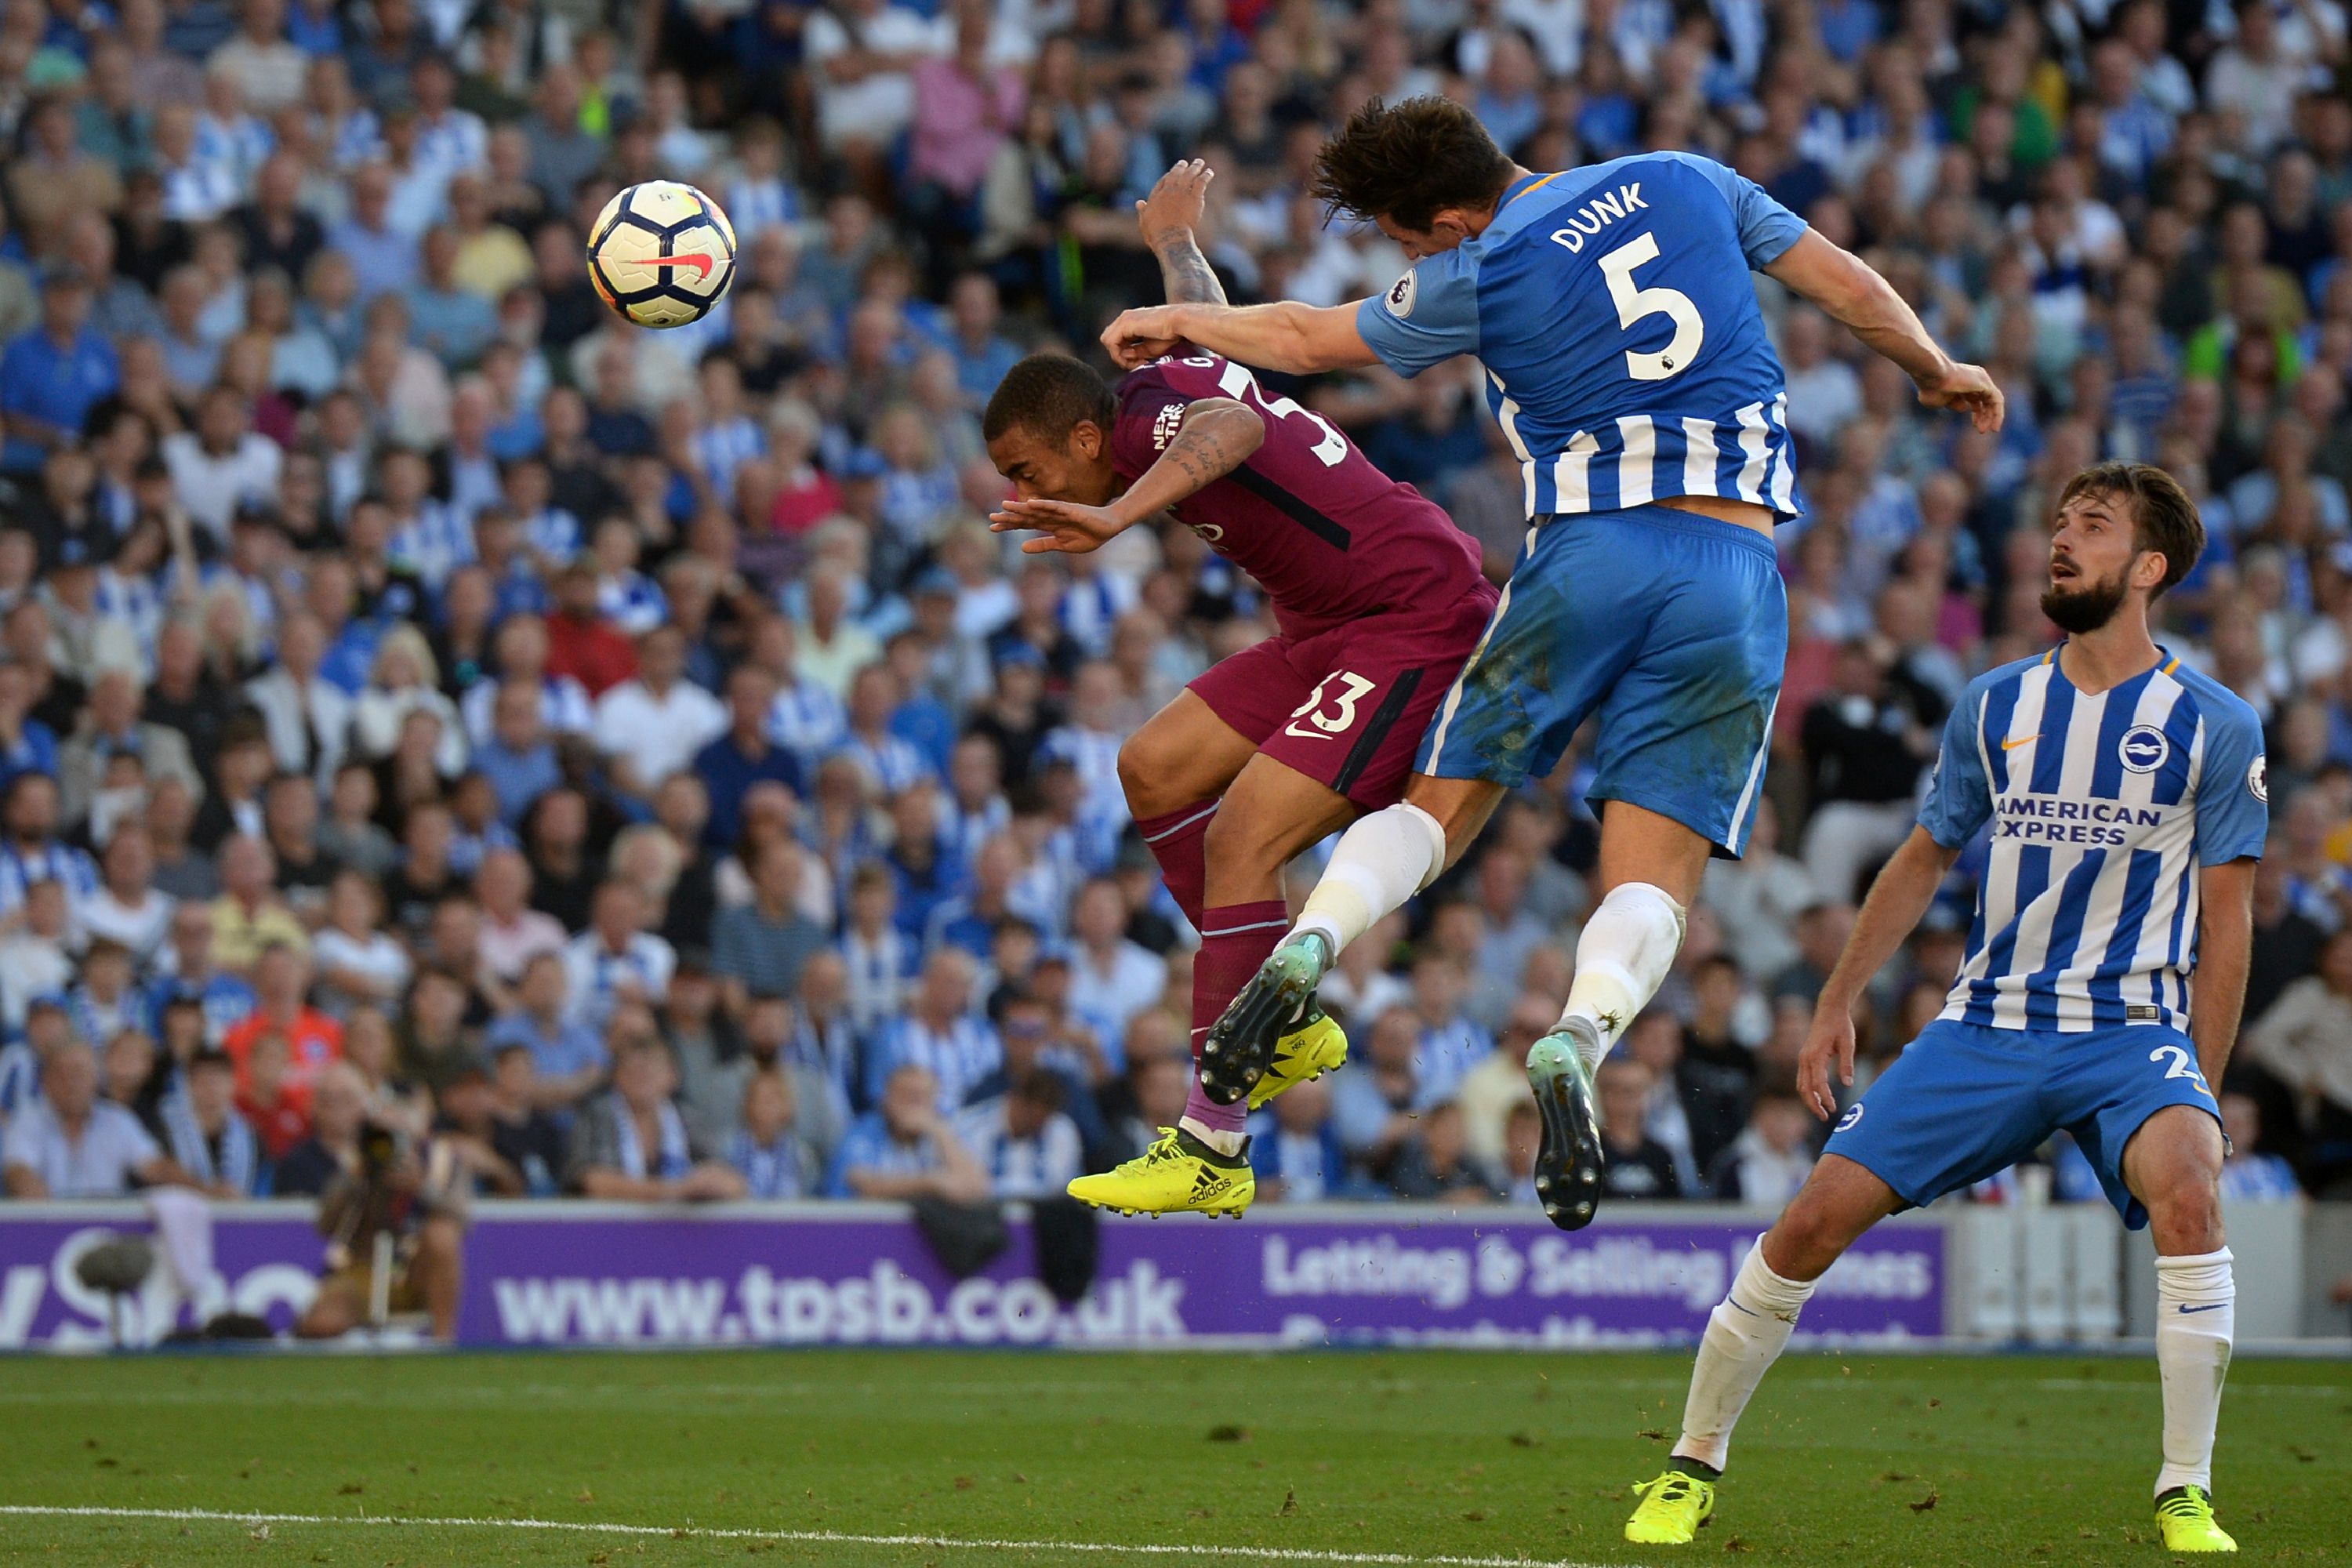 Brighton and Manchester City players jump for the ball